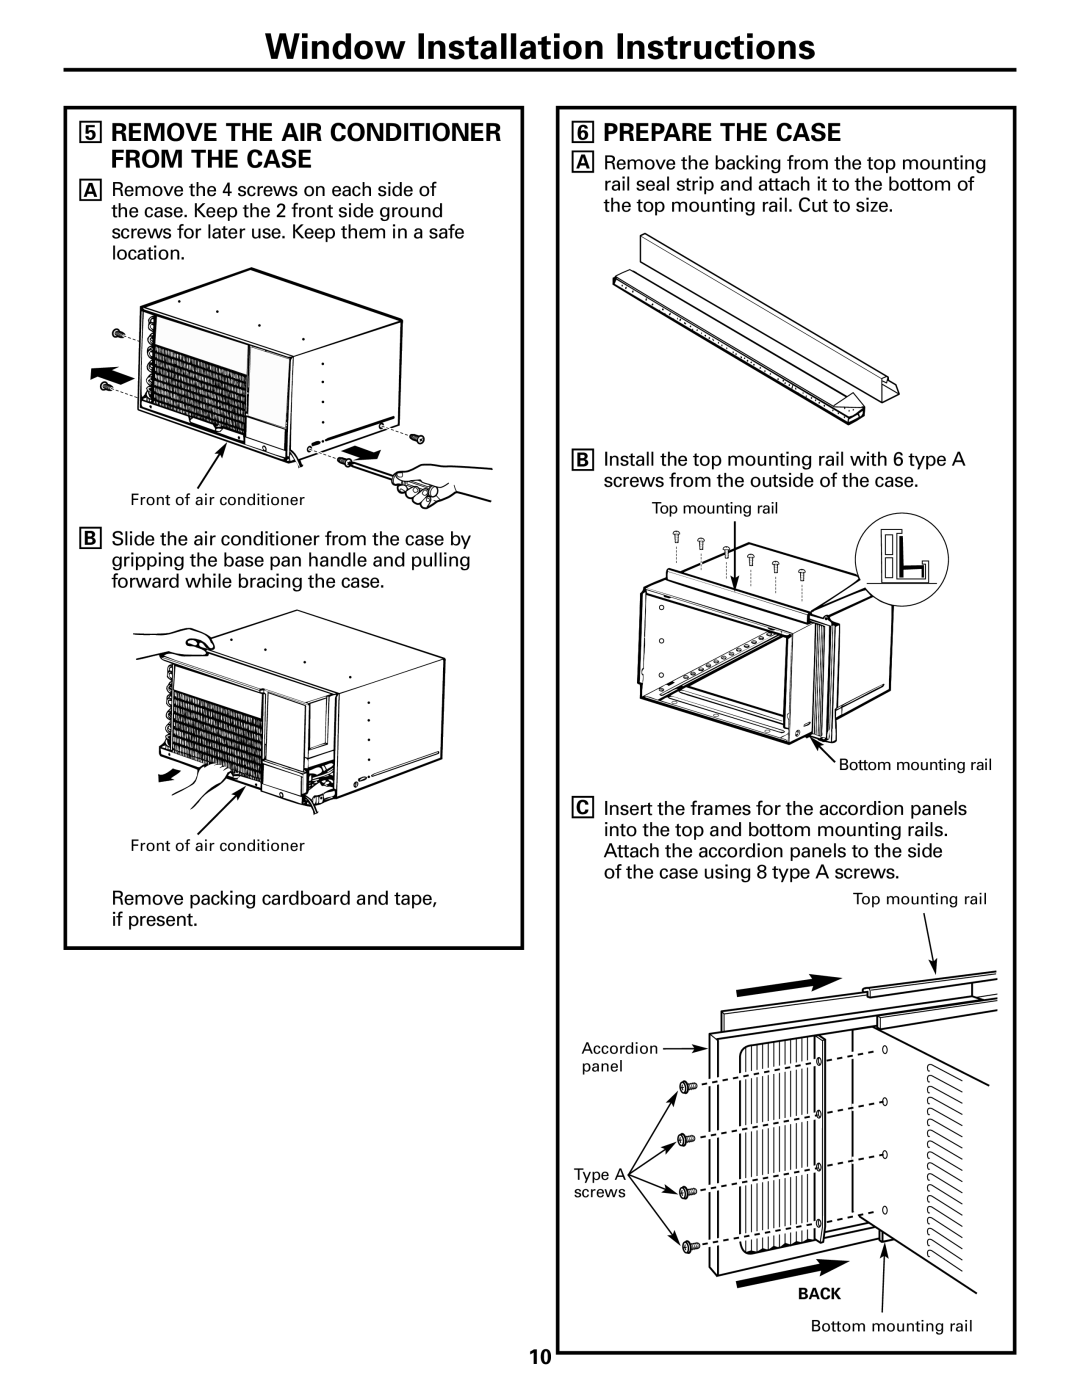 GE ASQ28 owner manual 5REMOVE THE AIR CONDITIONER FROM THE CASE, 6PREPARE THE CASE, Window Installation Instructions 